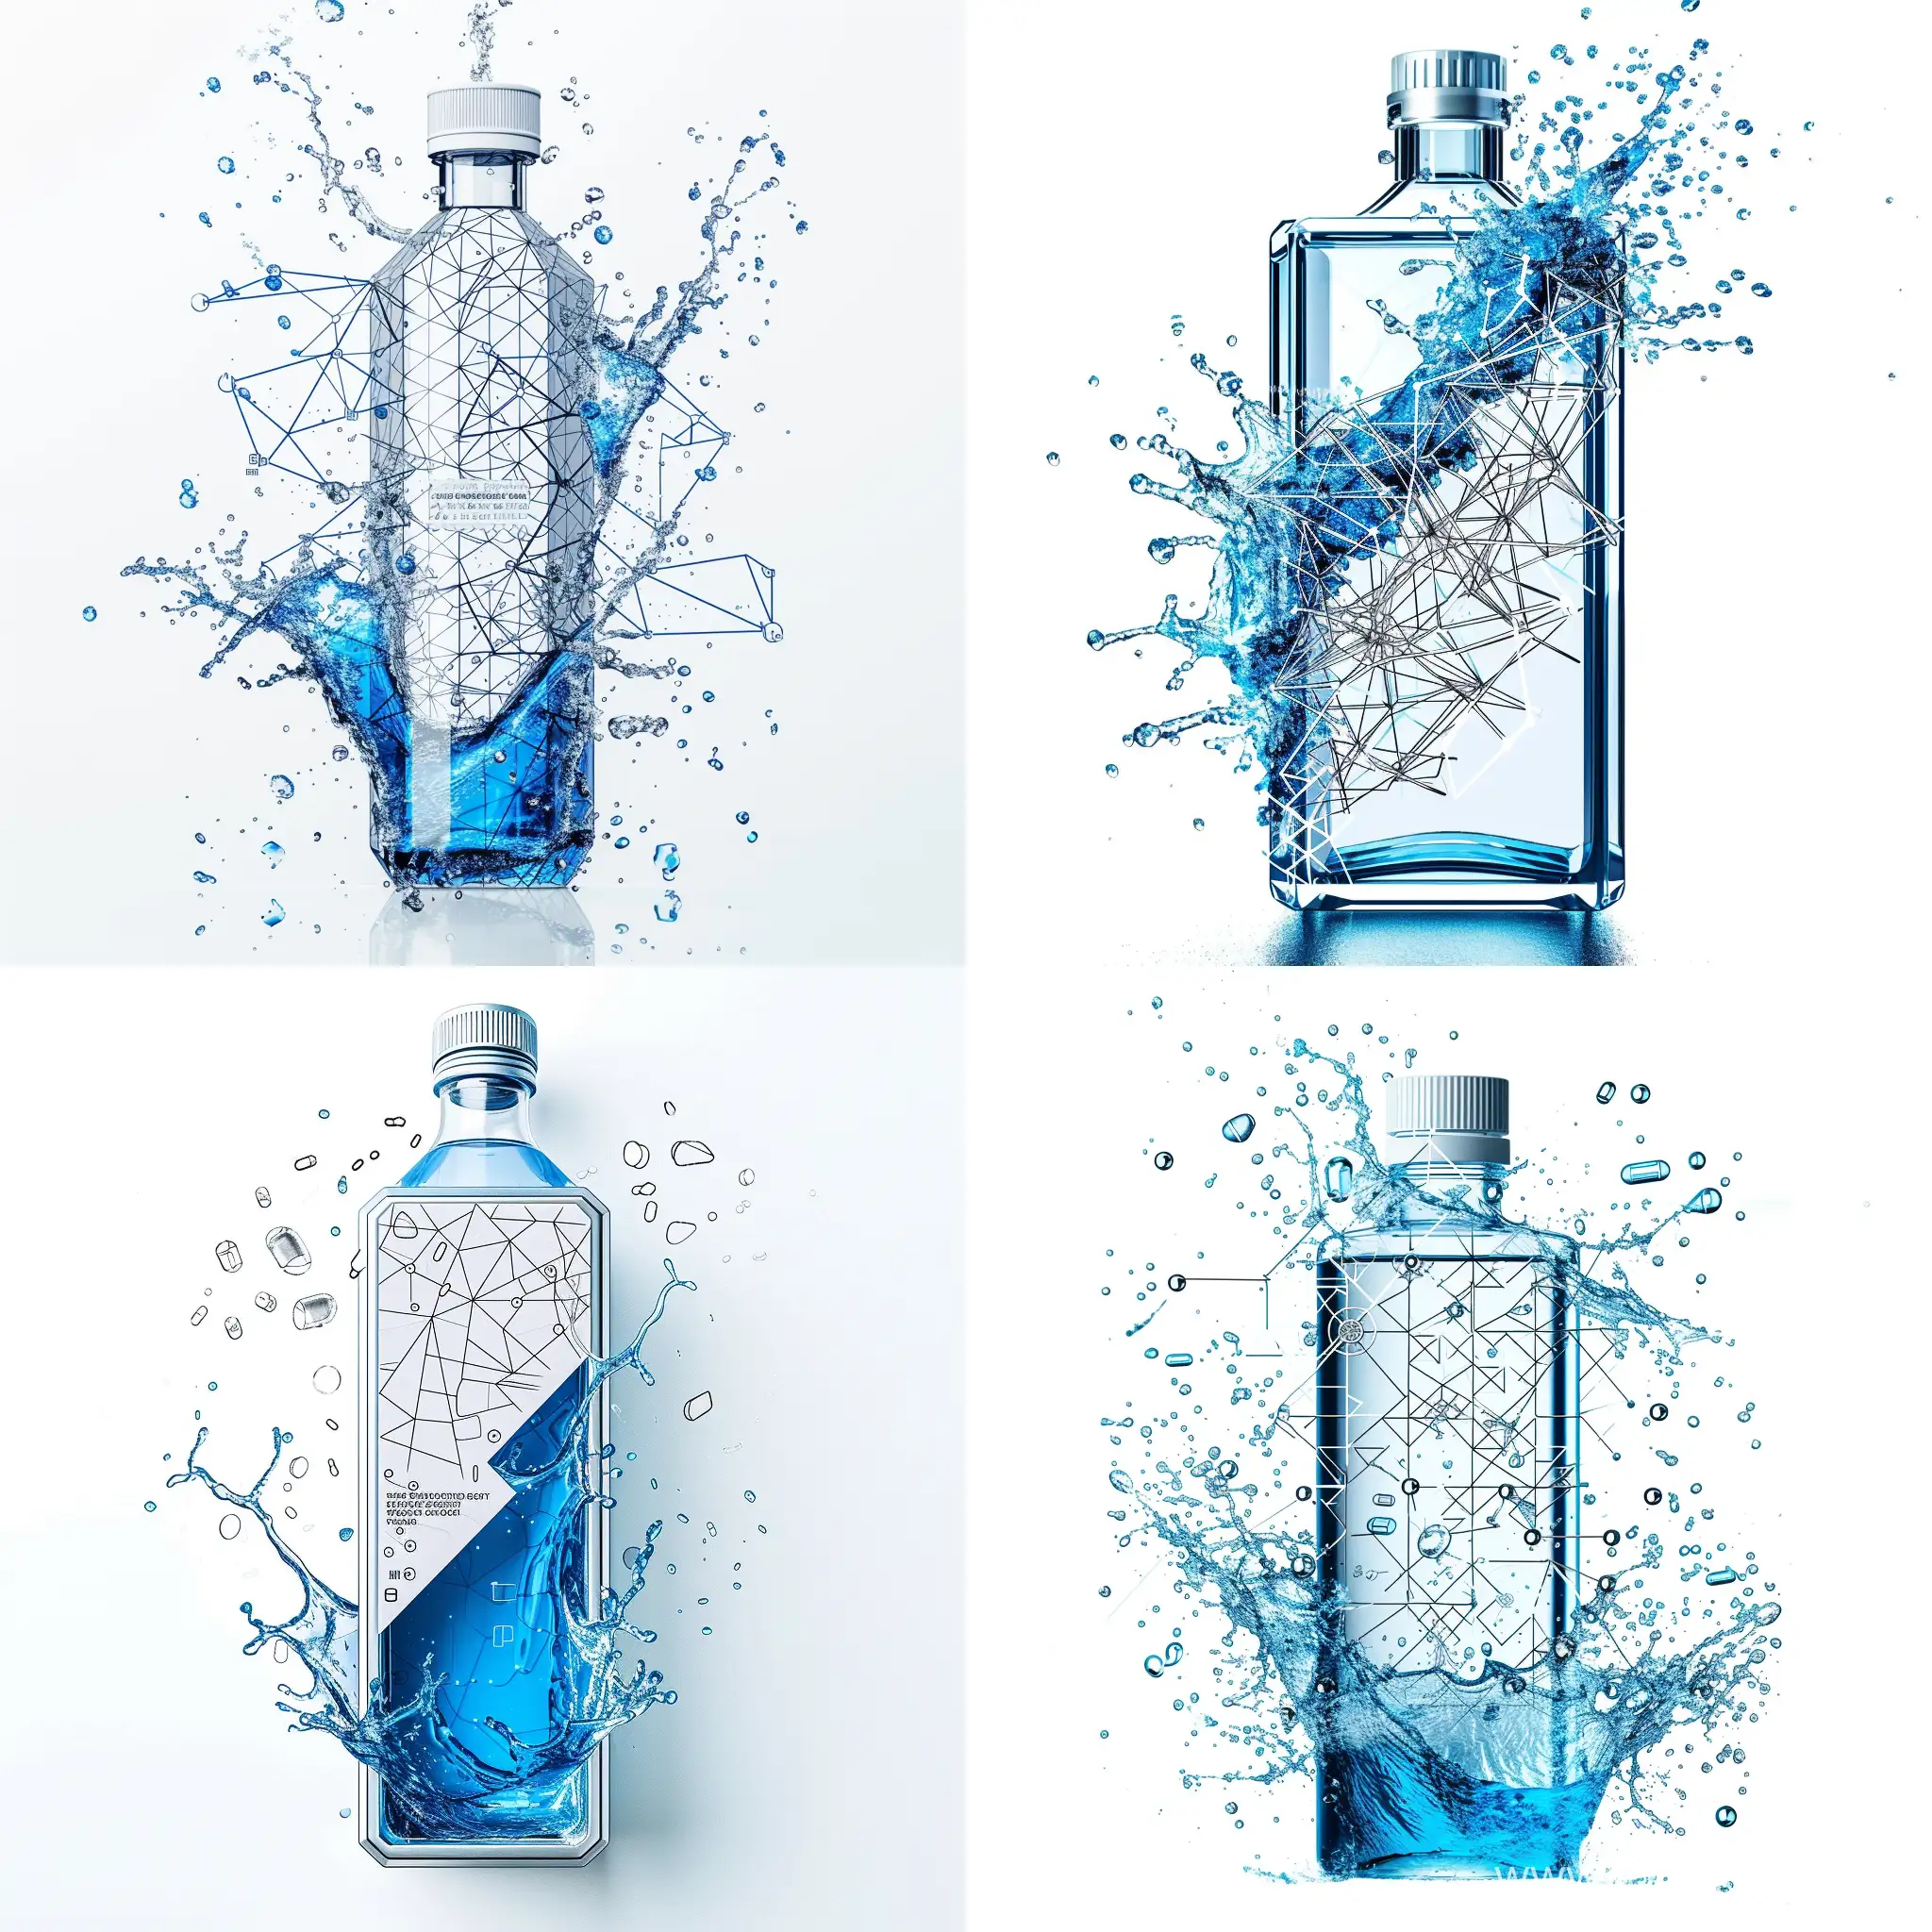 beverage rectangular bottle front view, blue water splash, minimalistic graphic design, high tech graphic design, medical look like, innovative design, graphic design label, best product graphic design, label with geometrical figures